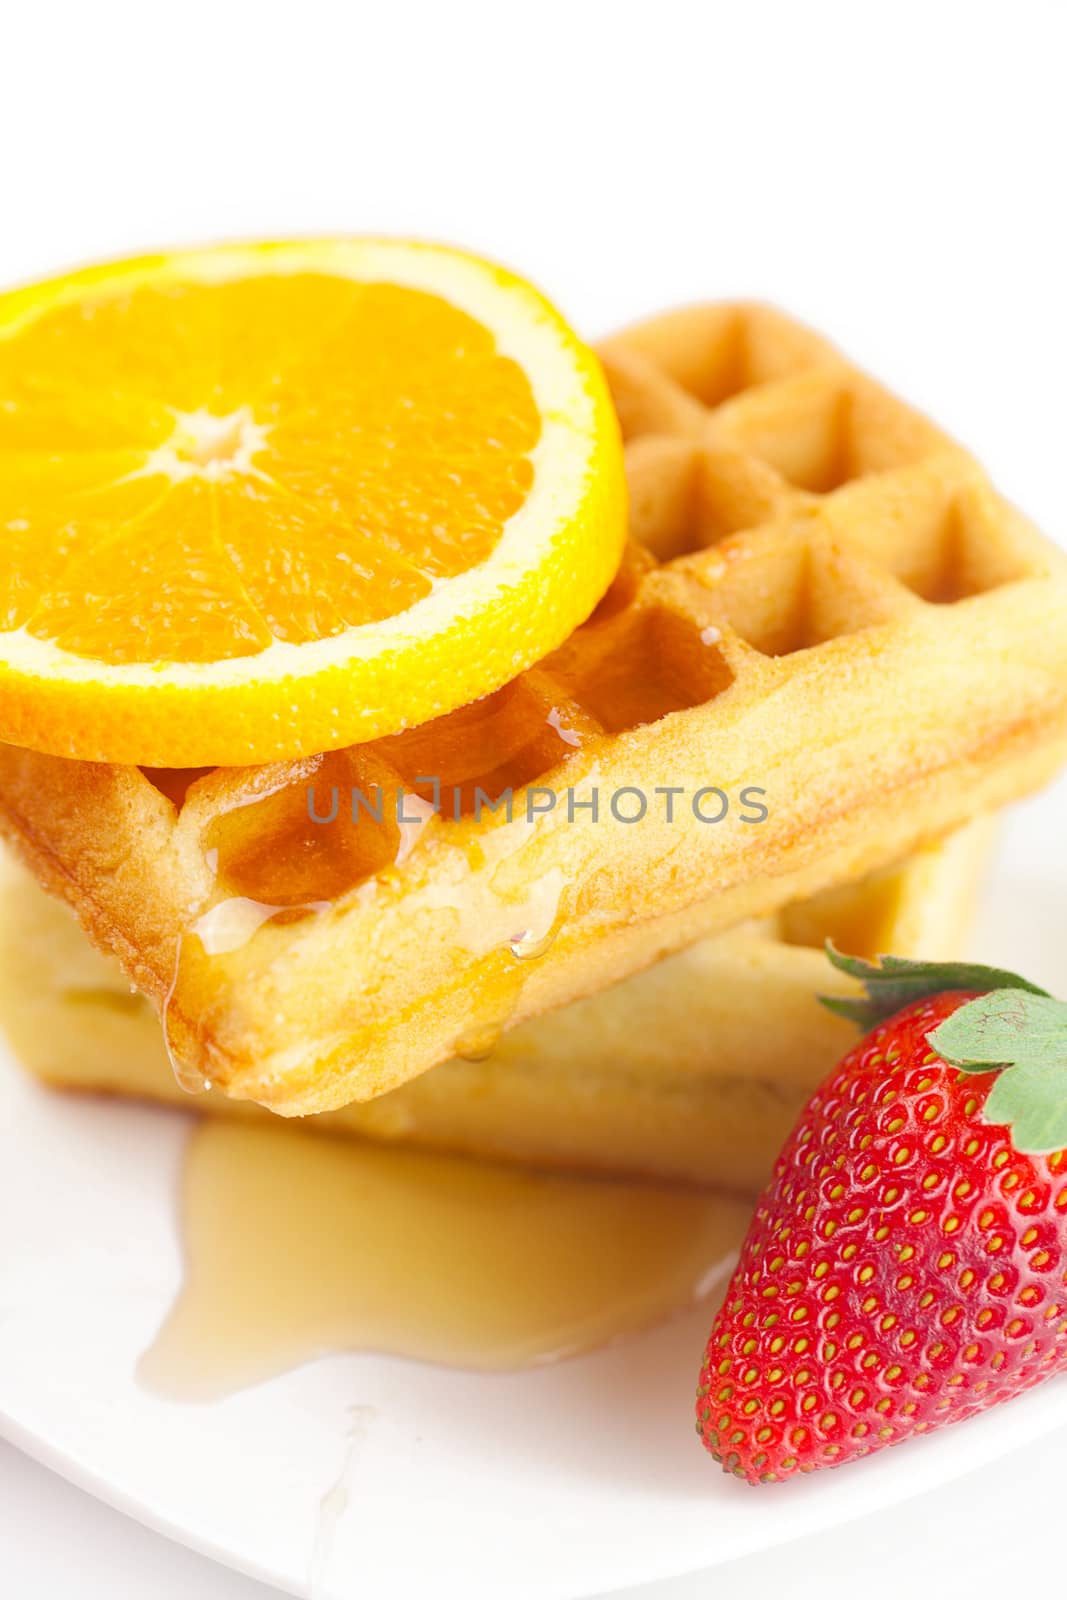 Belgian waffles,honey,orange and strawberries on a plate isolate by jannyjus